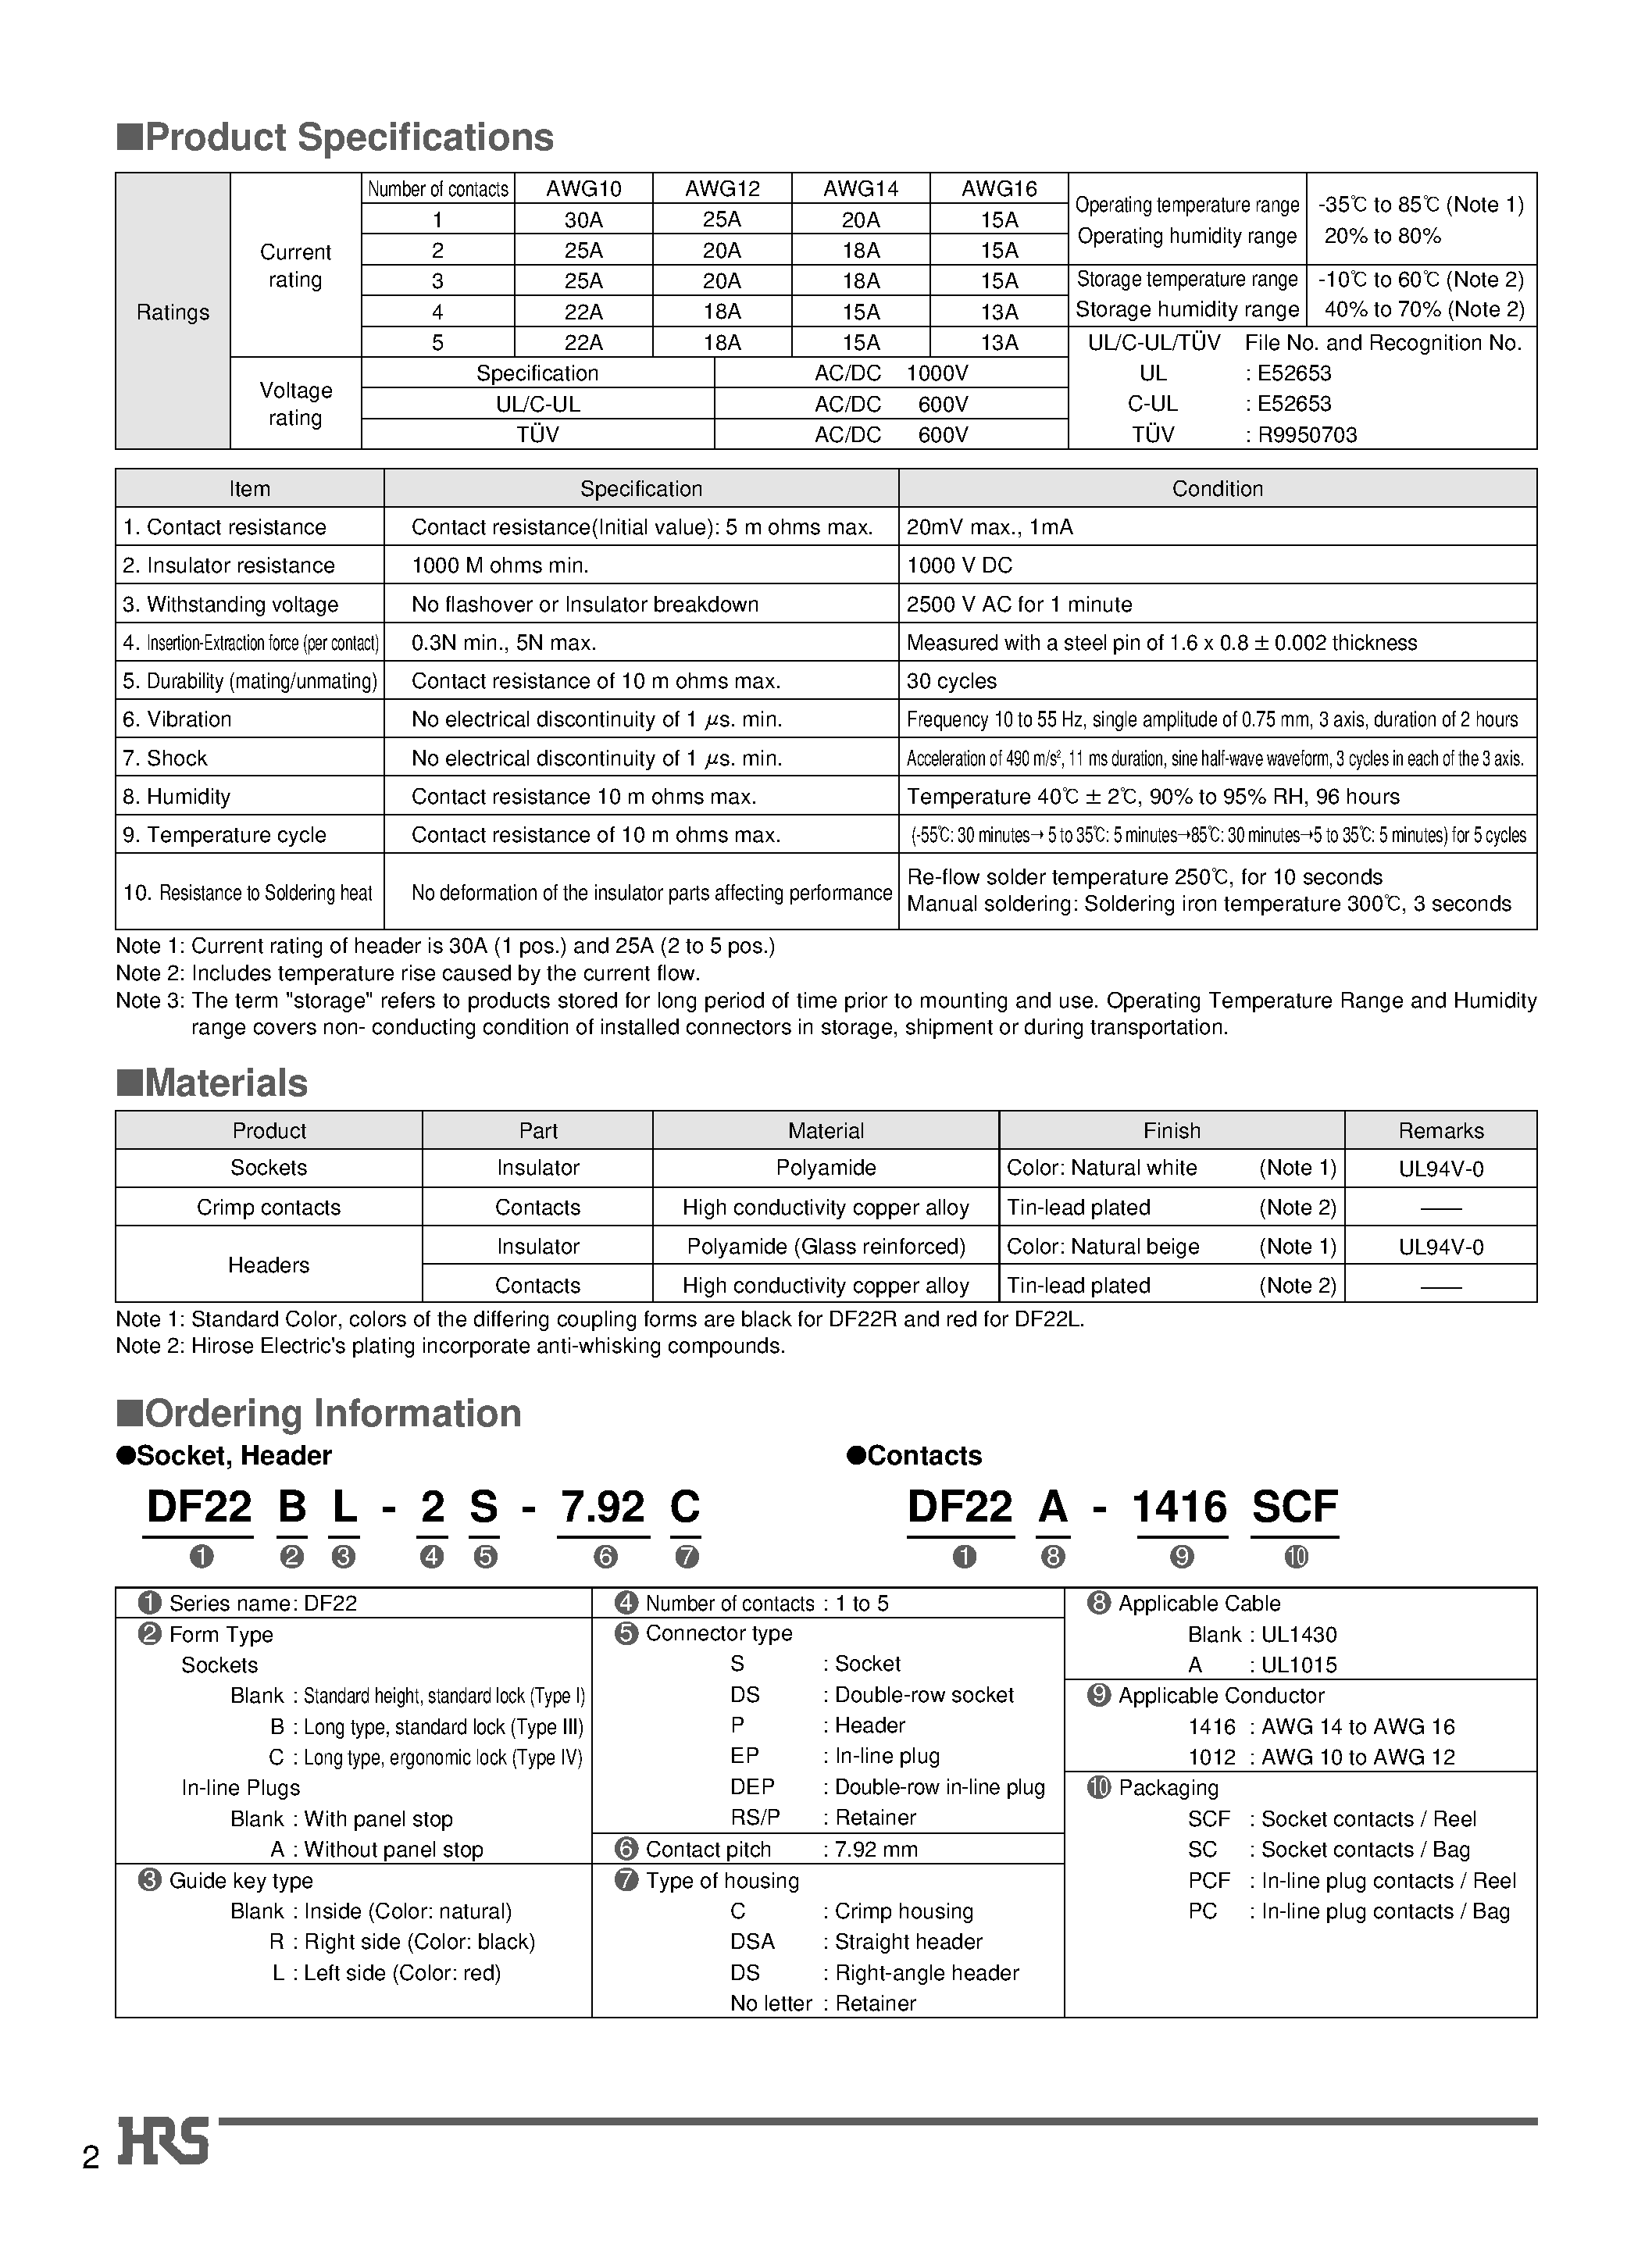 Datasheet DF22-4DEP-7.92C - 7.92 mm Contact Pitch/ High-Current Connectors for Internal Power Supplies (UL/ C-UL and TUV Listed) page 2